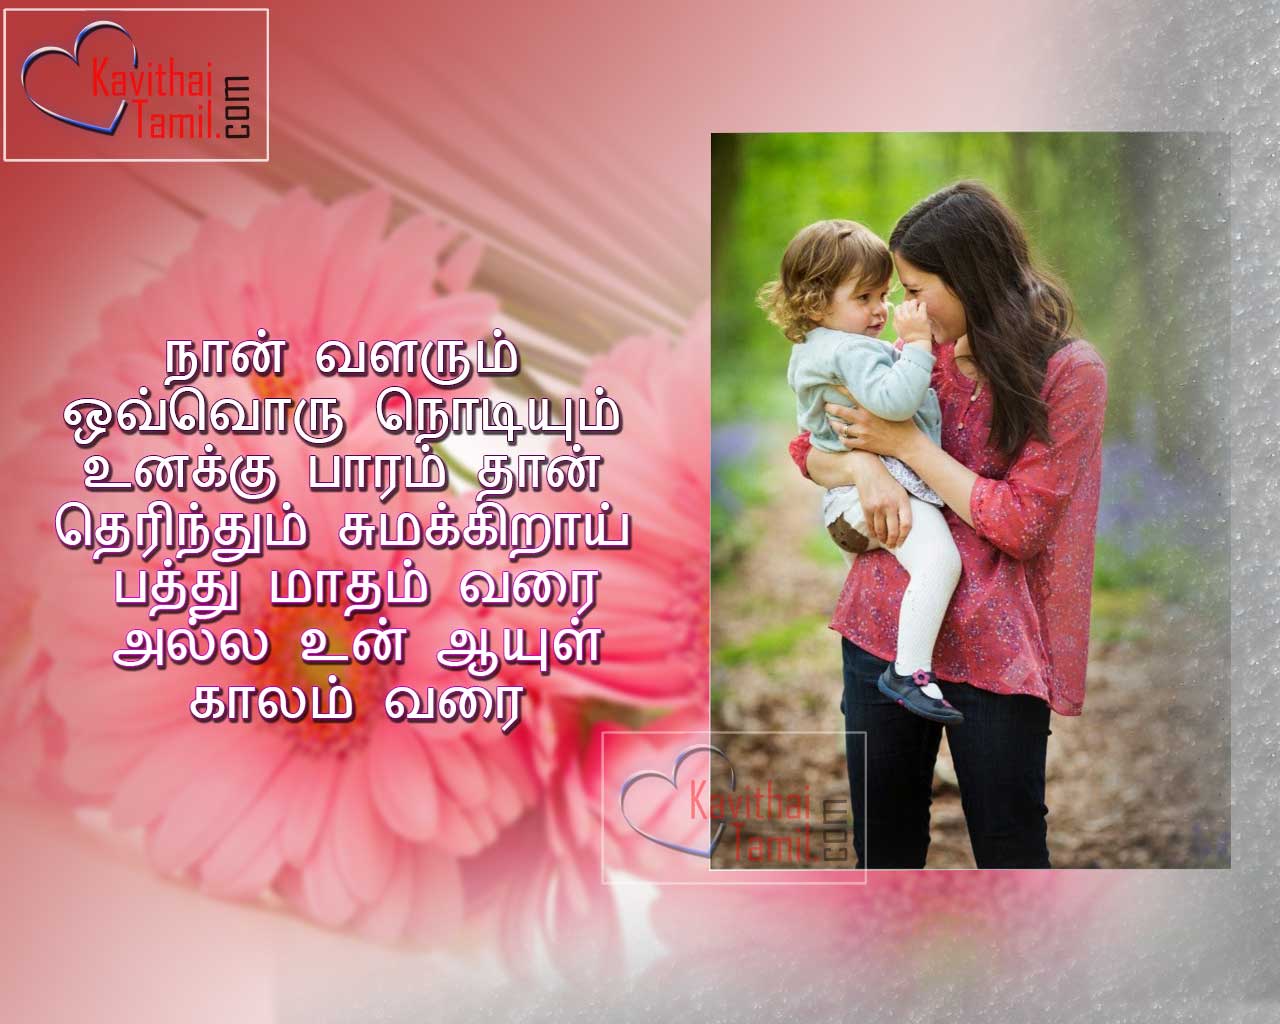 Azhagaana Kavithaigal About Thayin Anbu In Tamil Language With Cute Mother And Baby Photos For Facebook Profile